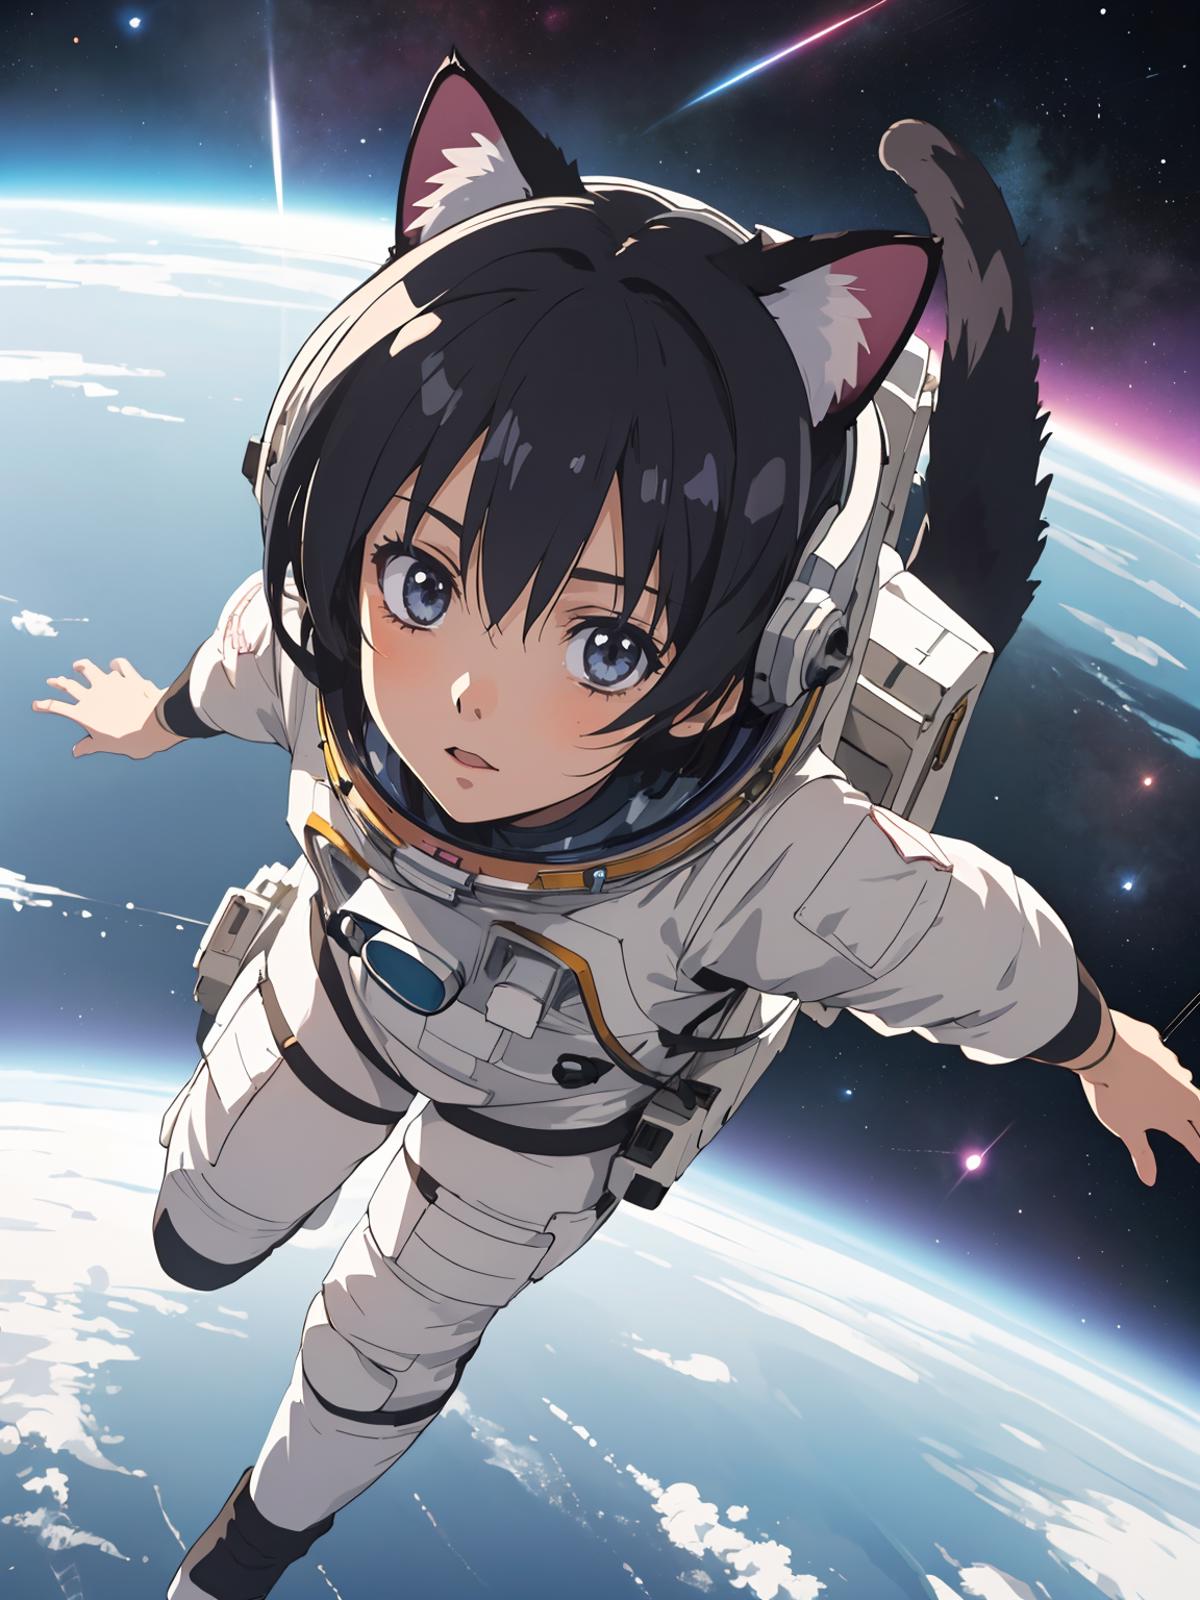 Anime-style cartoon of a woman in a white spacesuit with blue eyes, floating through space.